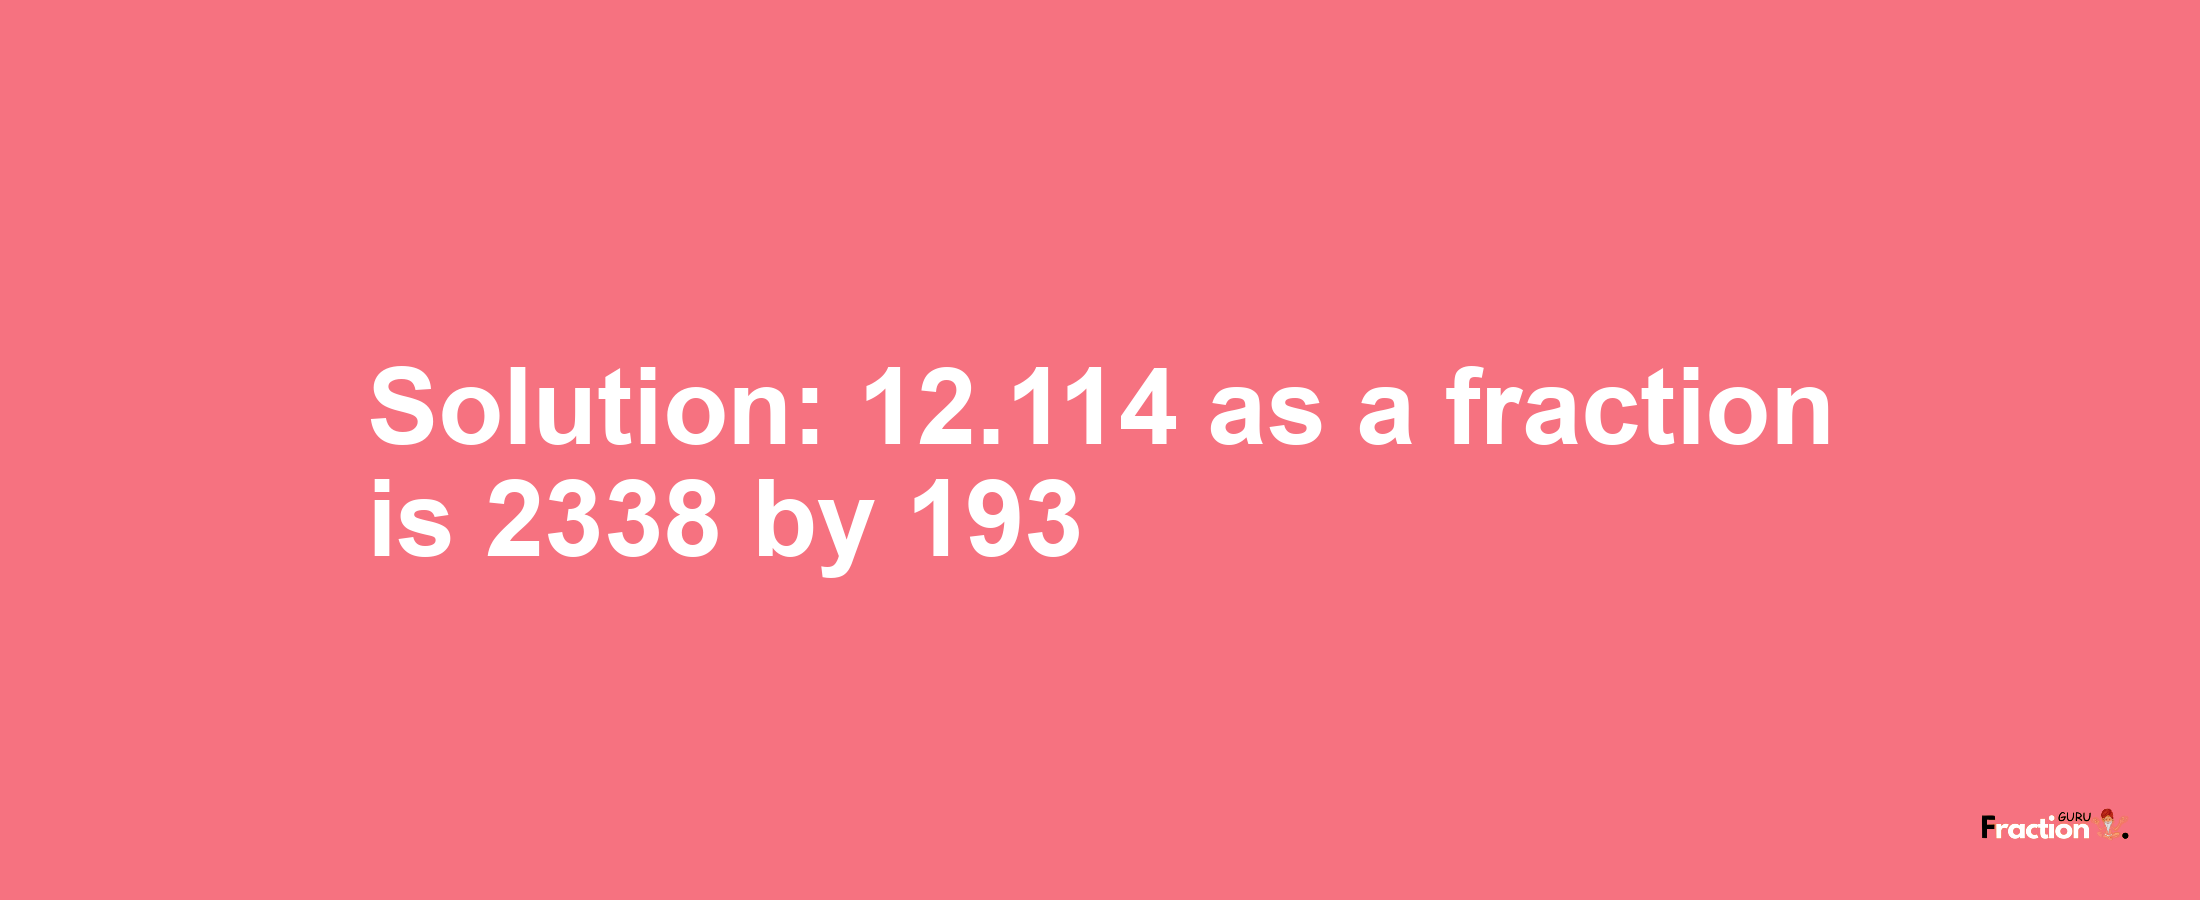 Solution:12.114 as a fraction is 2338/193